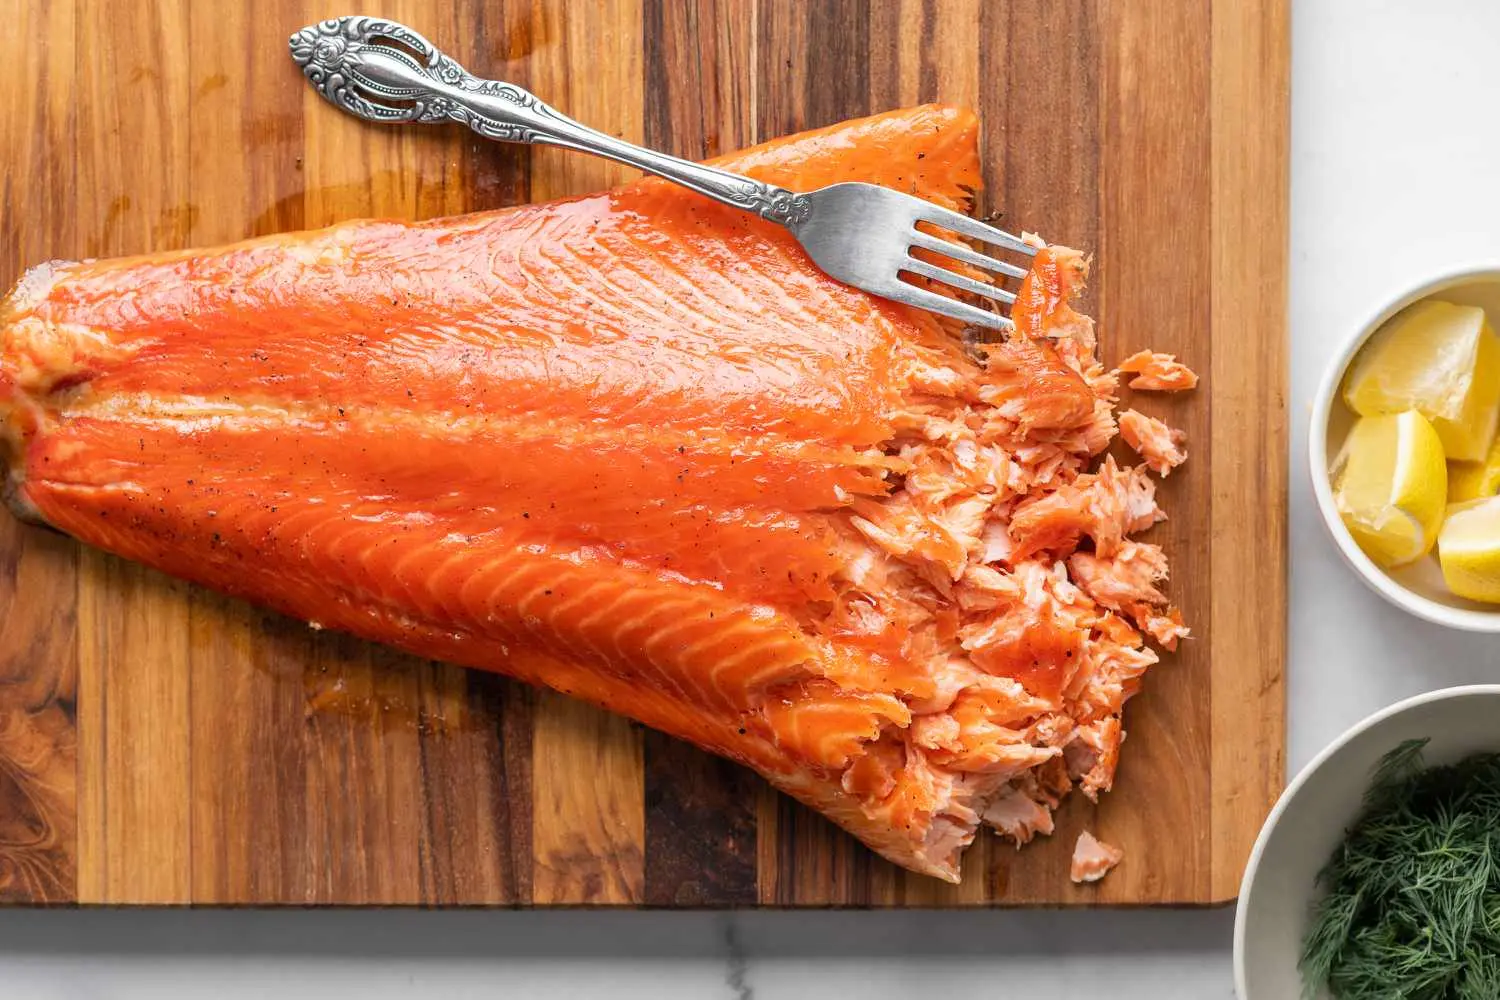 how long to cook smoked salmon - How long should salmon be cooked on